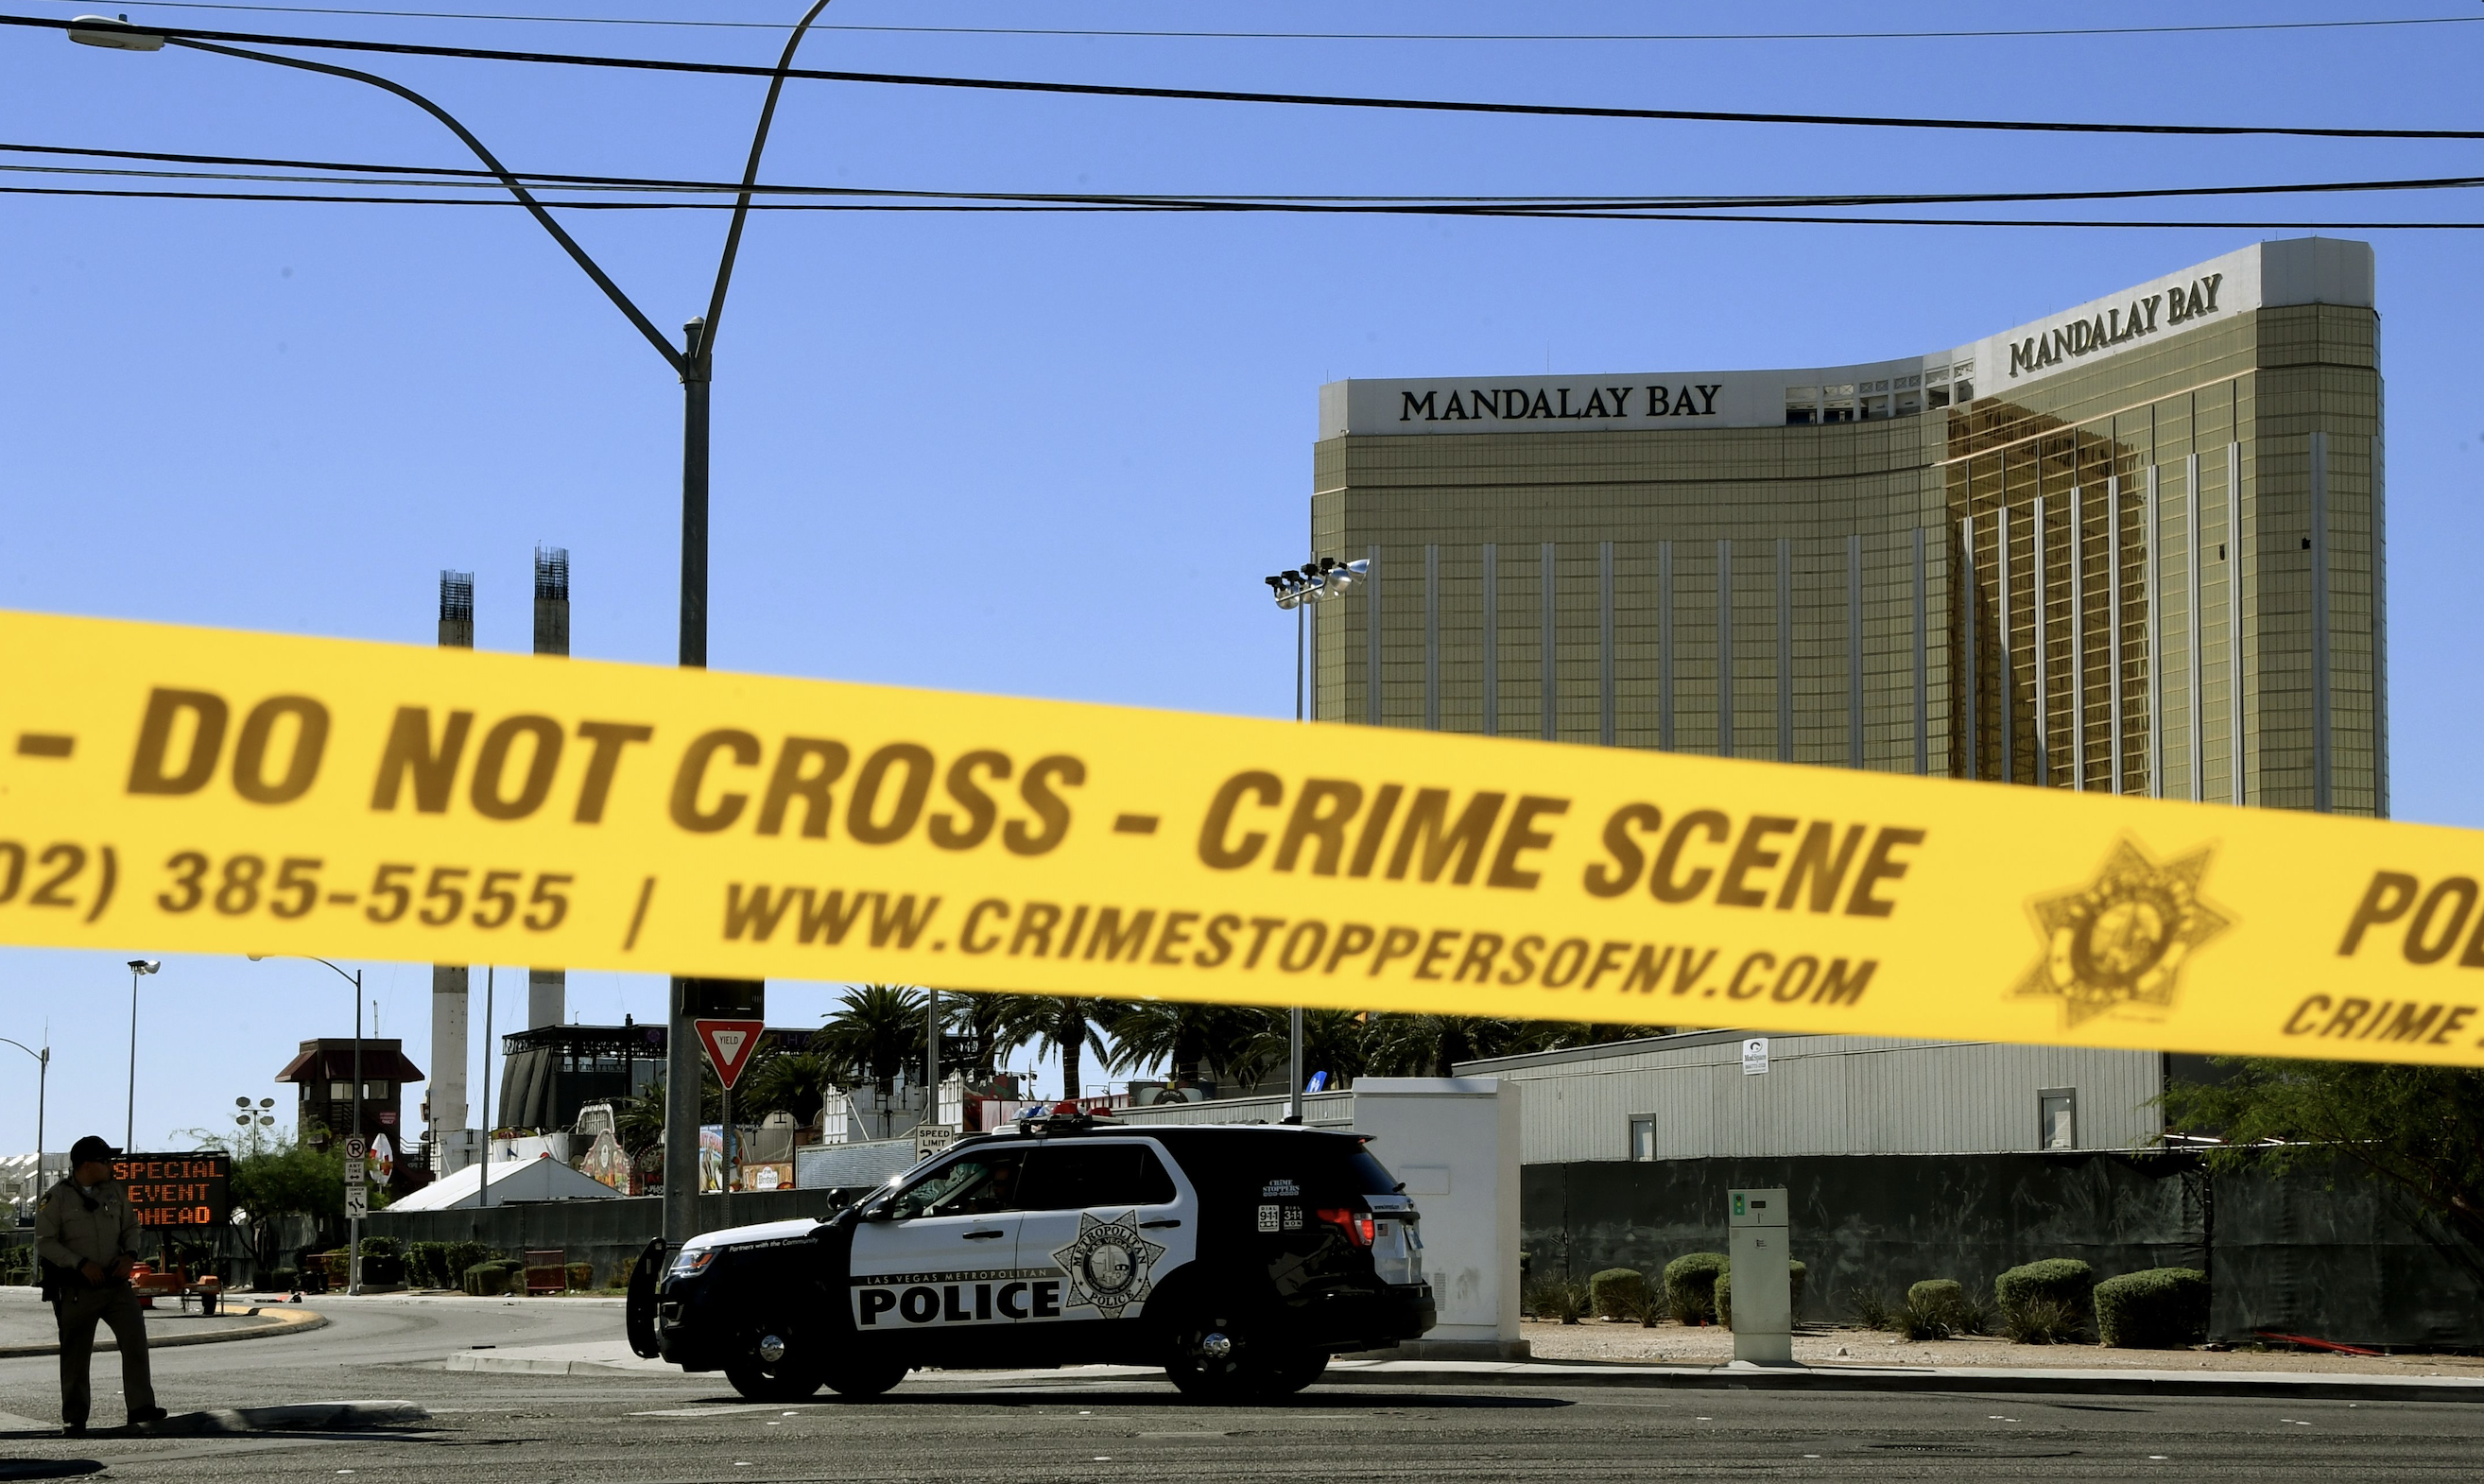 New Development Revealed In 2017 Las Vegas Massacre After Alleged Letters Discovered From Ex-Con To Shooter